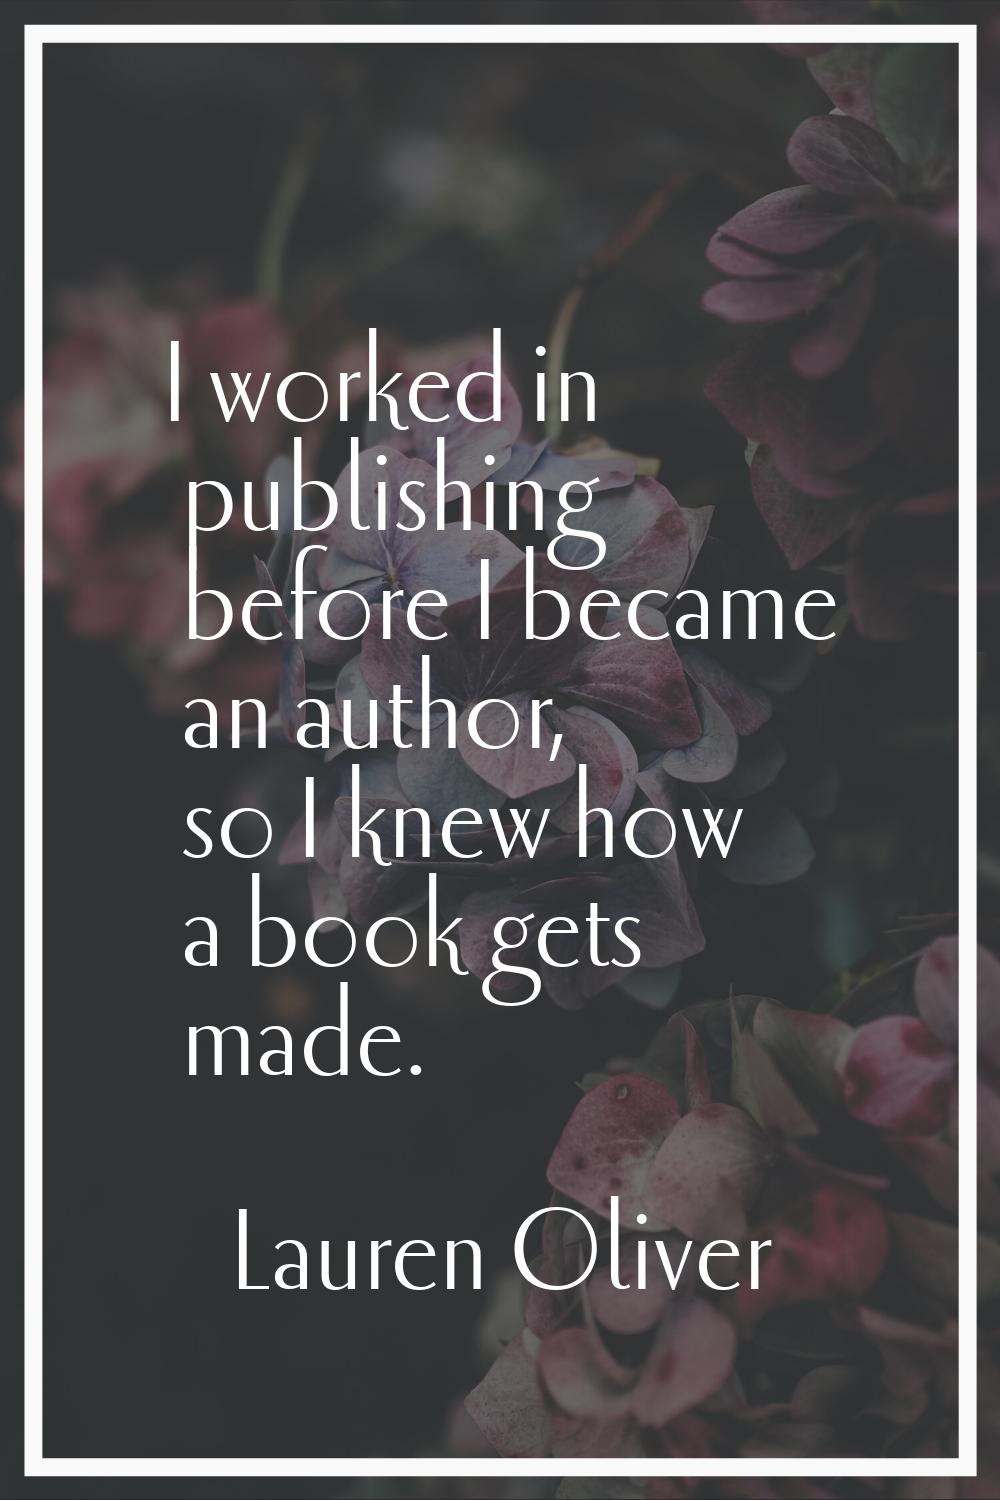 I worked in publishing before I became an author, so I knew how a book gets made.